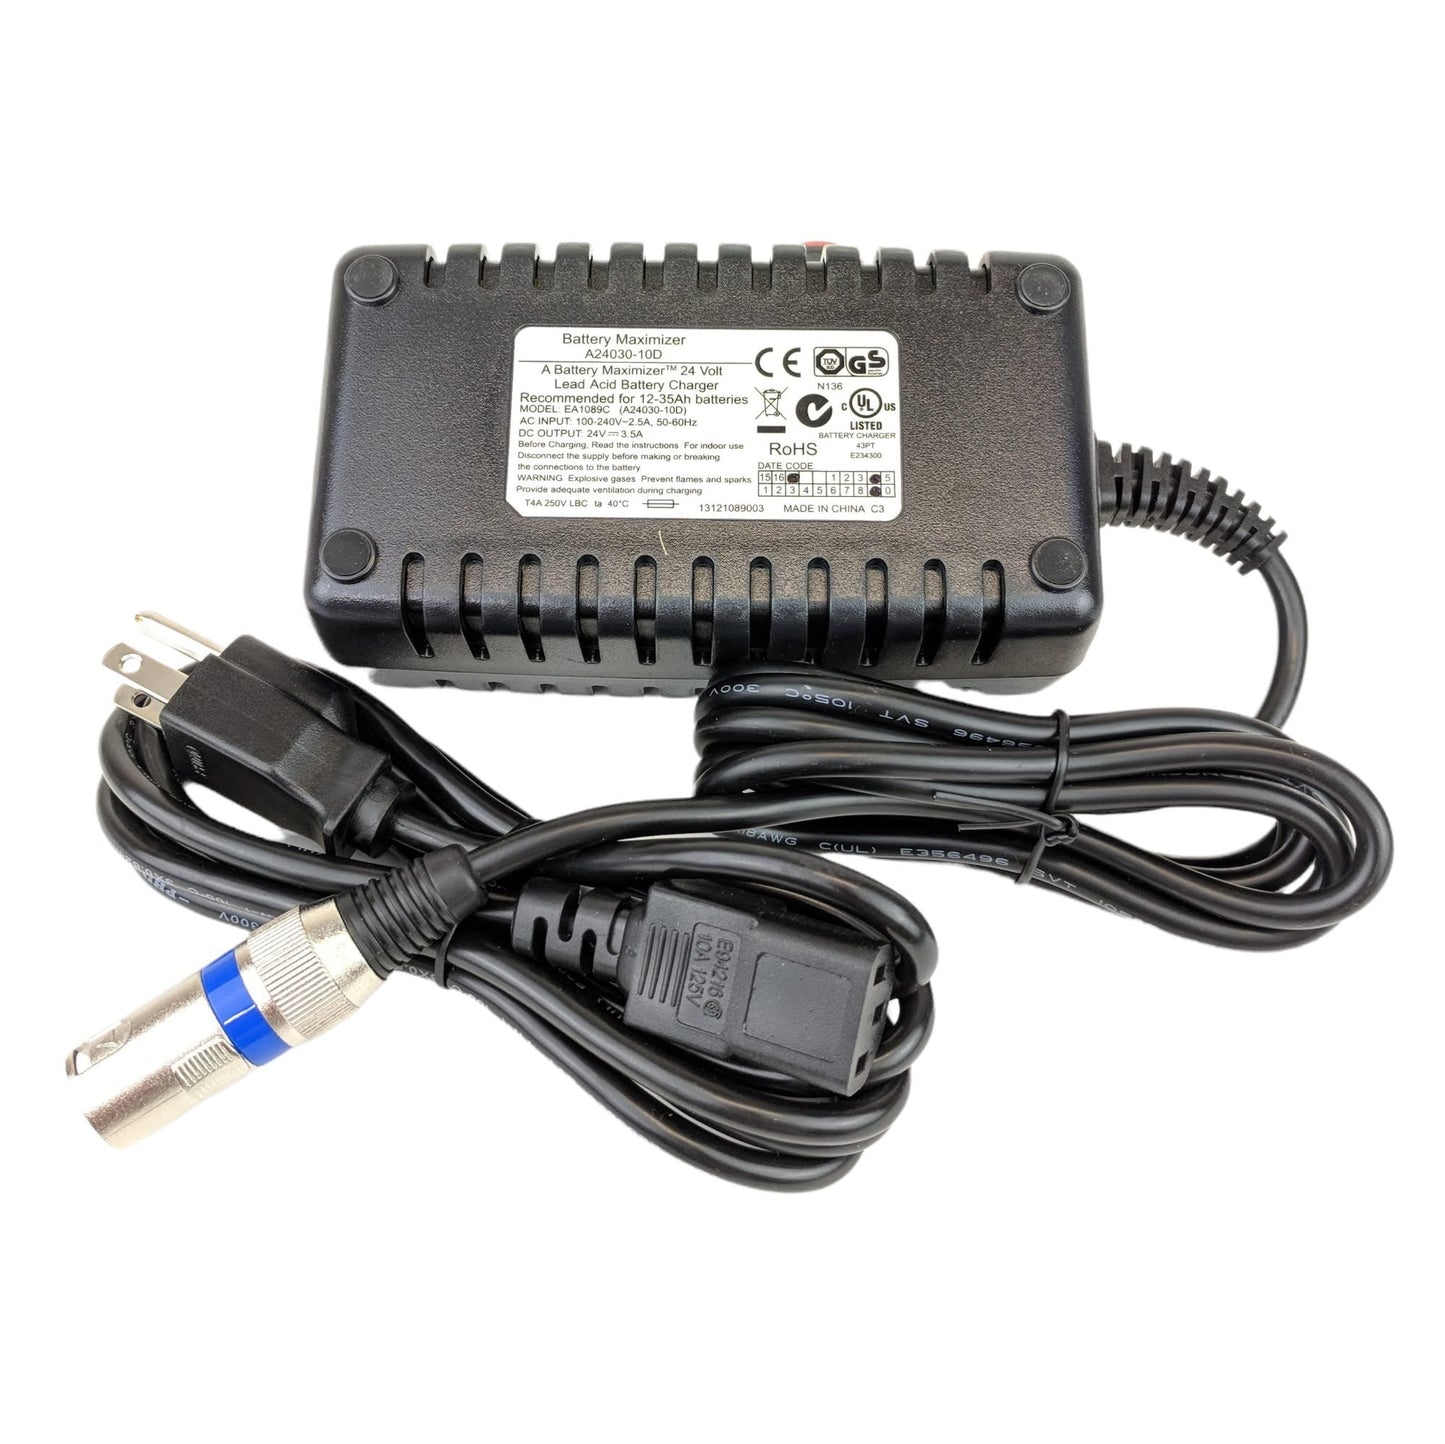 Charger - MBE-CHG35A-STD - Replaces